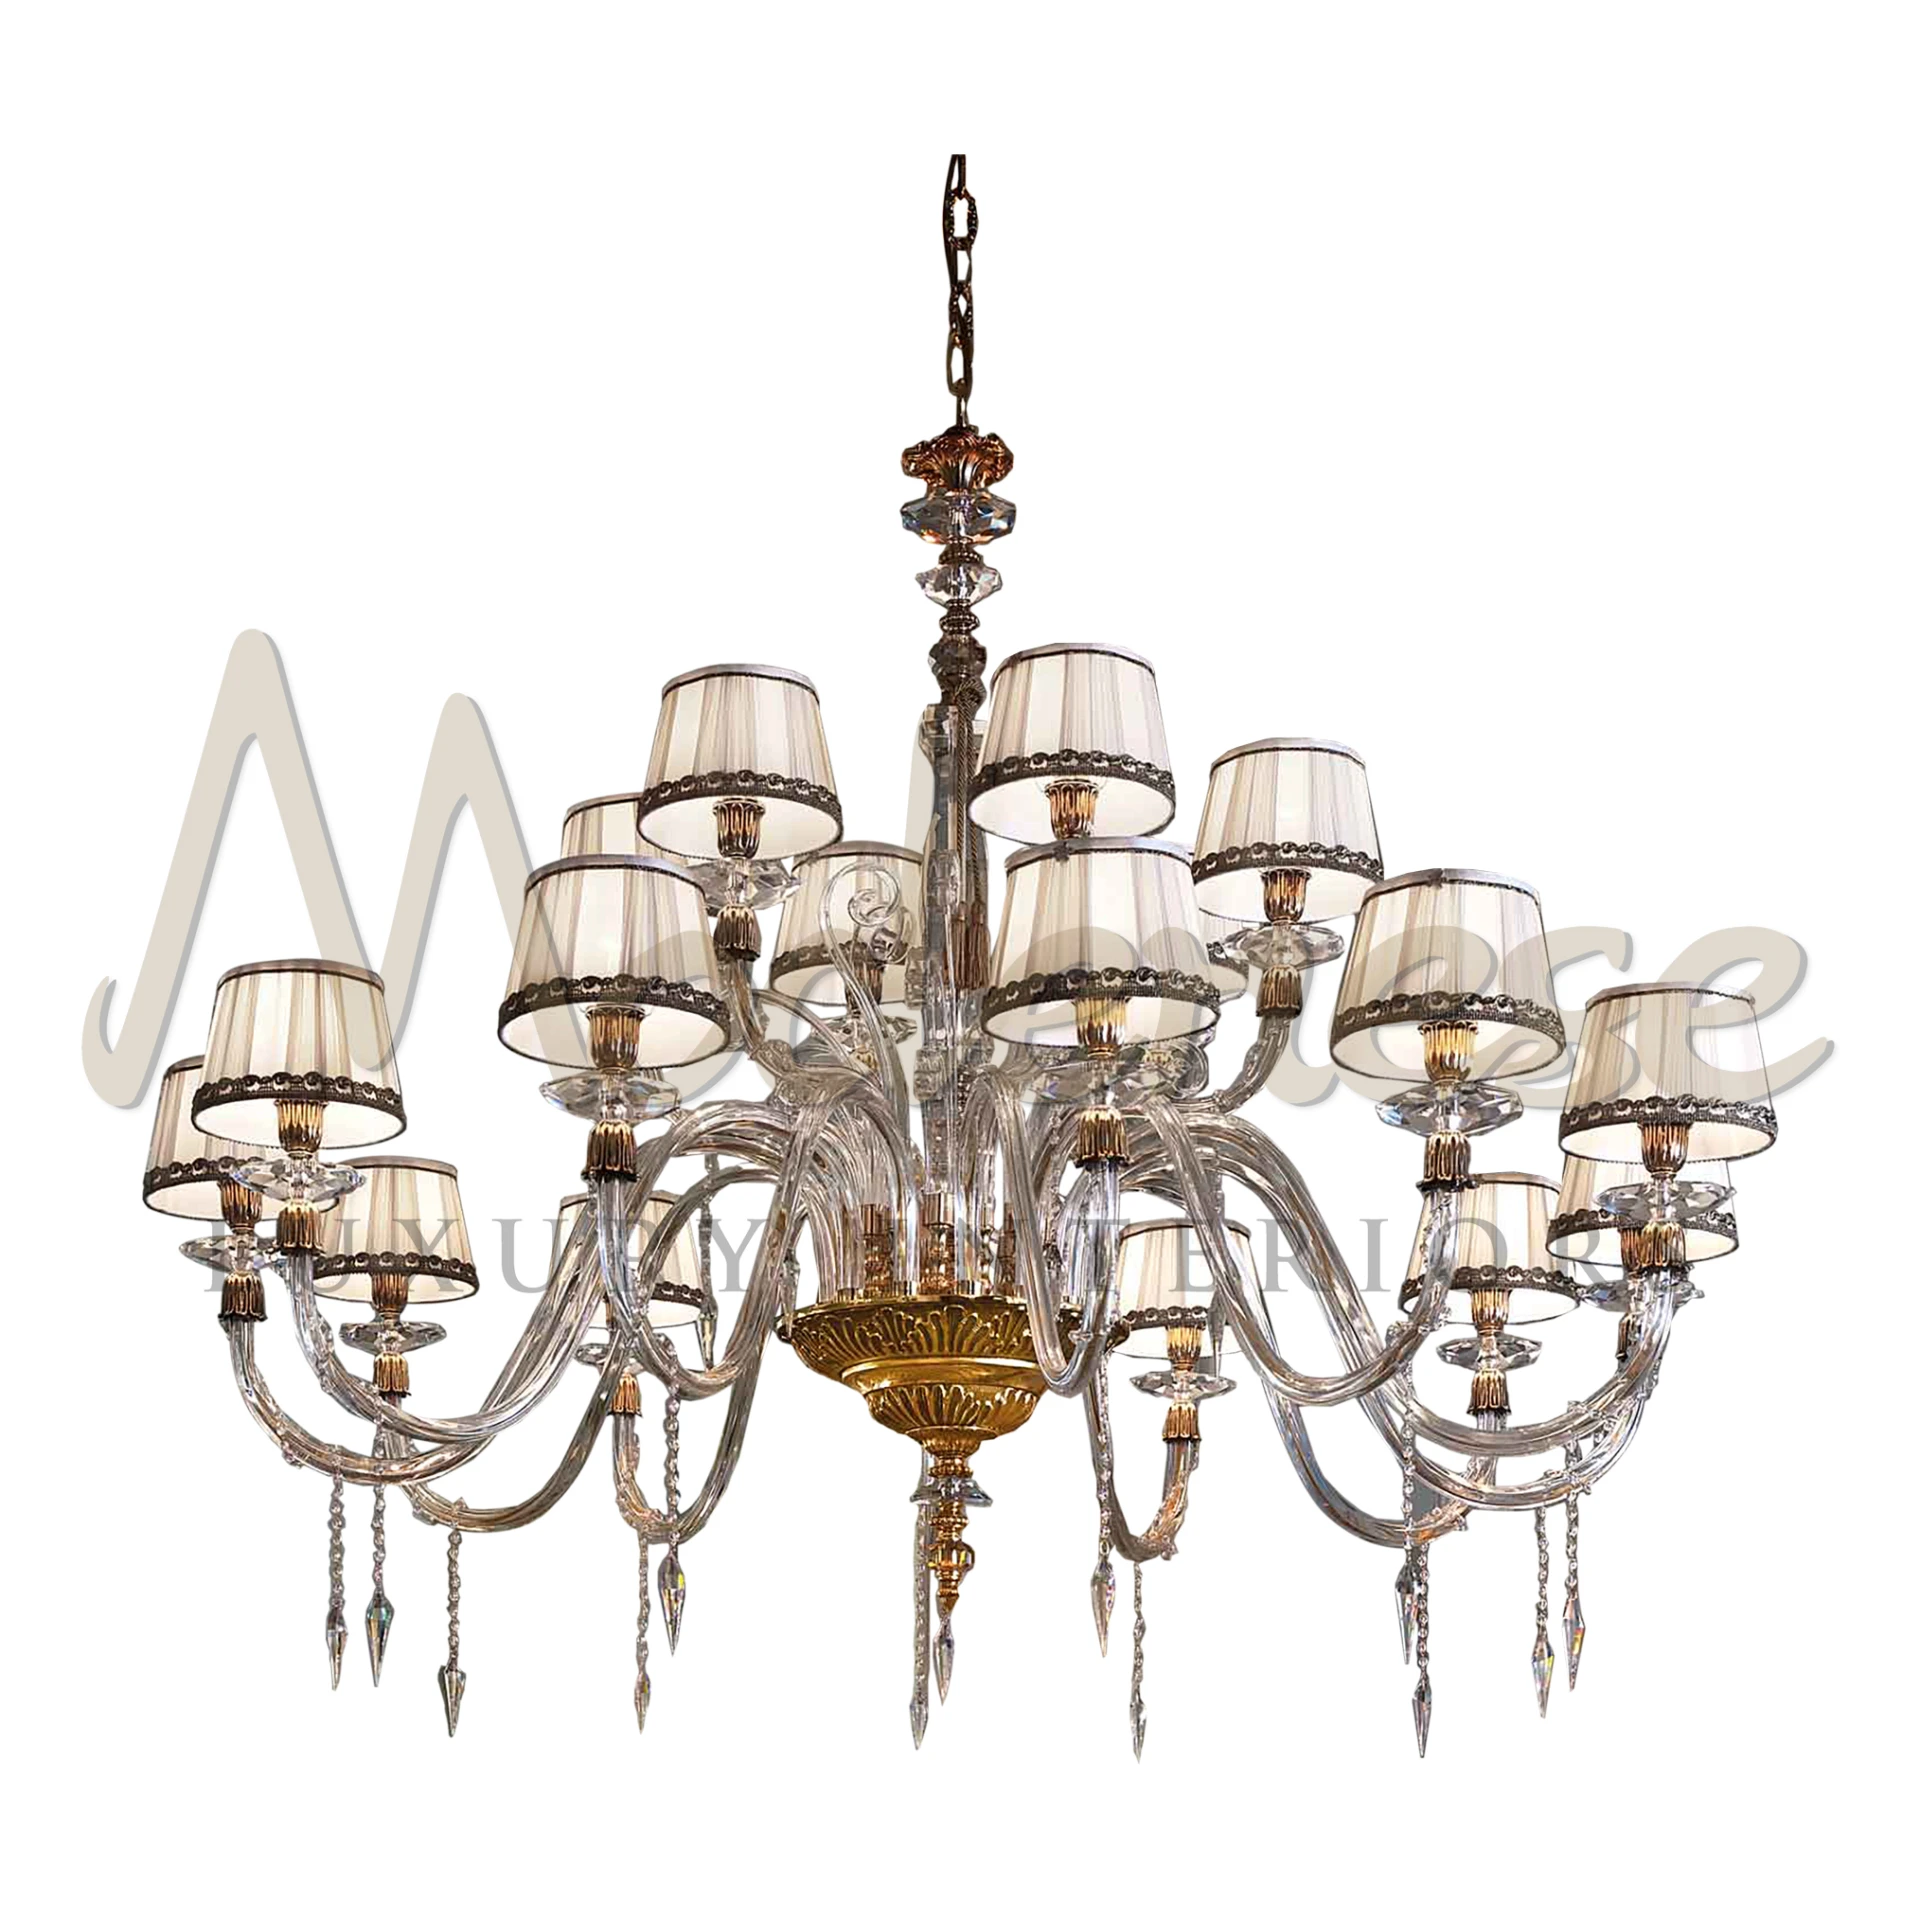 Luxurious 'Renaissance Radiance Chandelier' with crystal pendants and shaded lights.